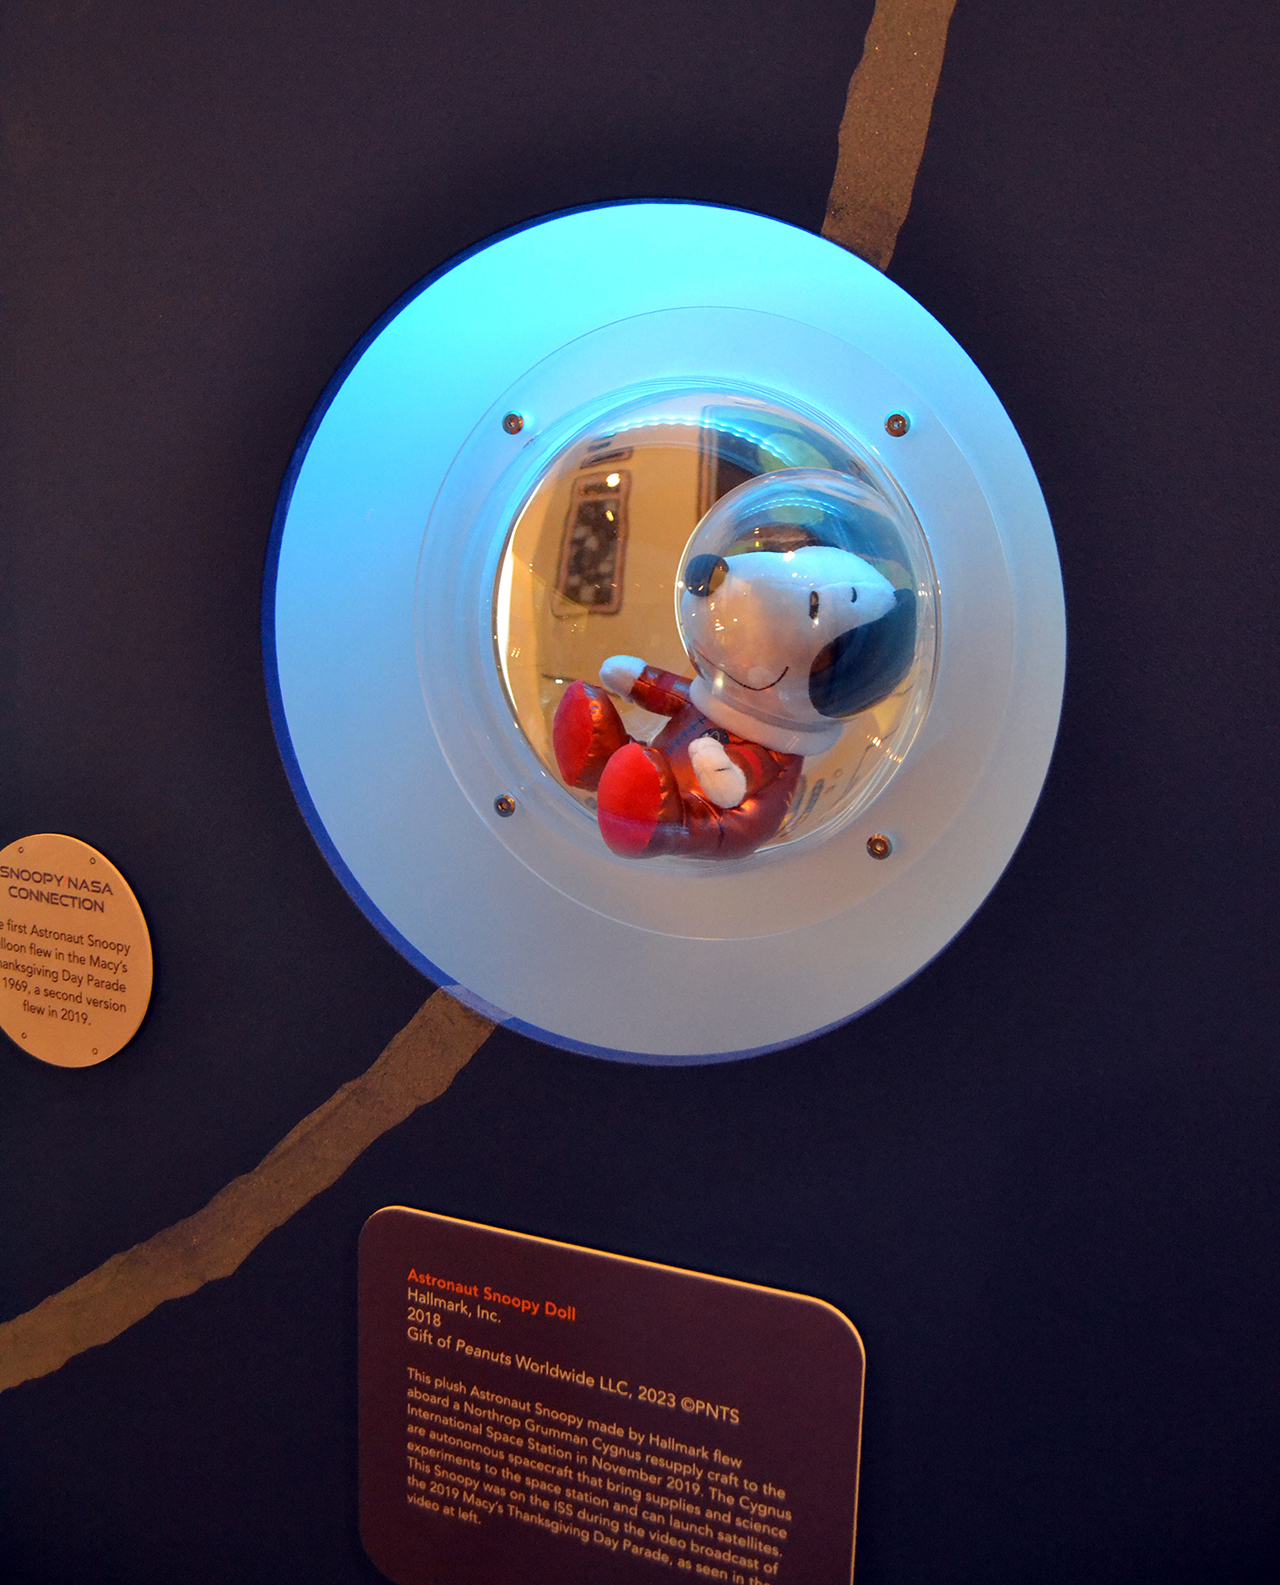 a plush astronaut Snoopy doll wearing a spacesuit on display at a museum